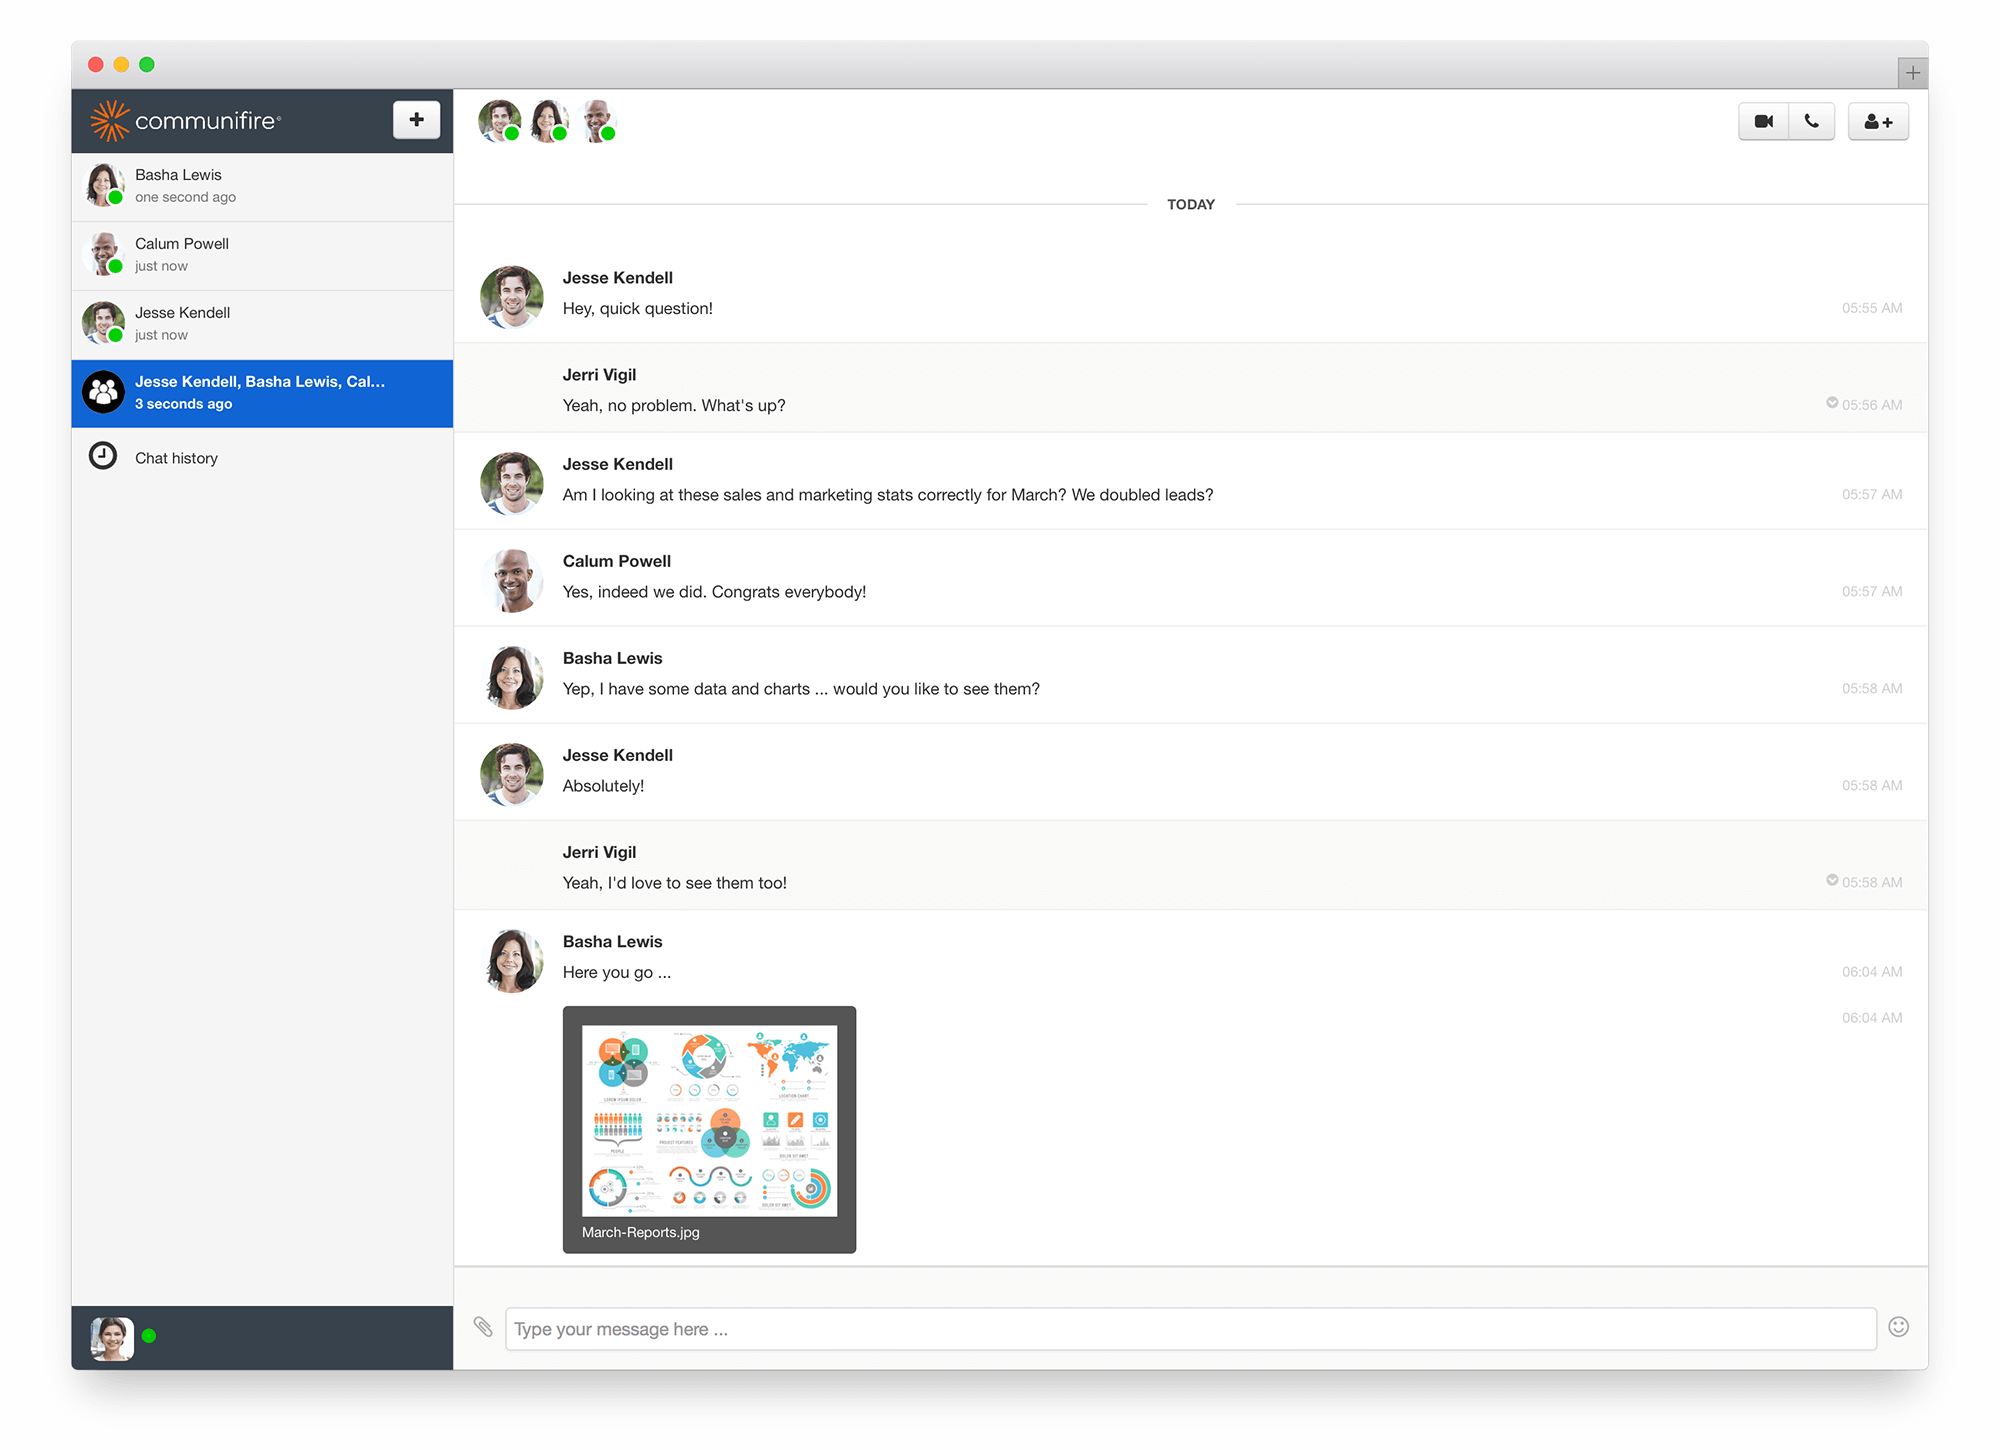 intranet chat - manage remote employees